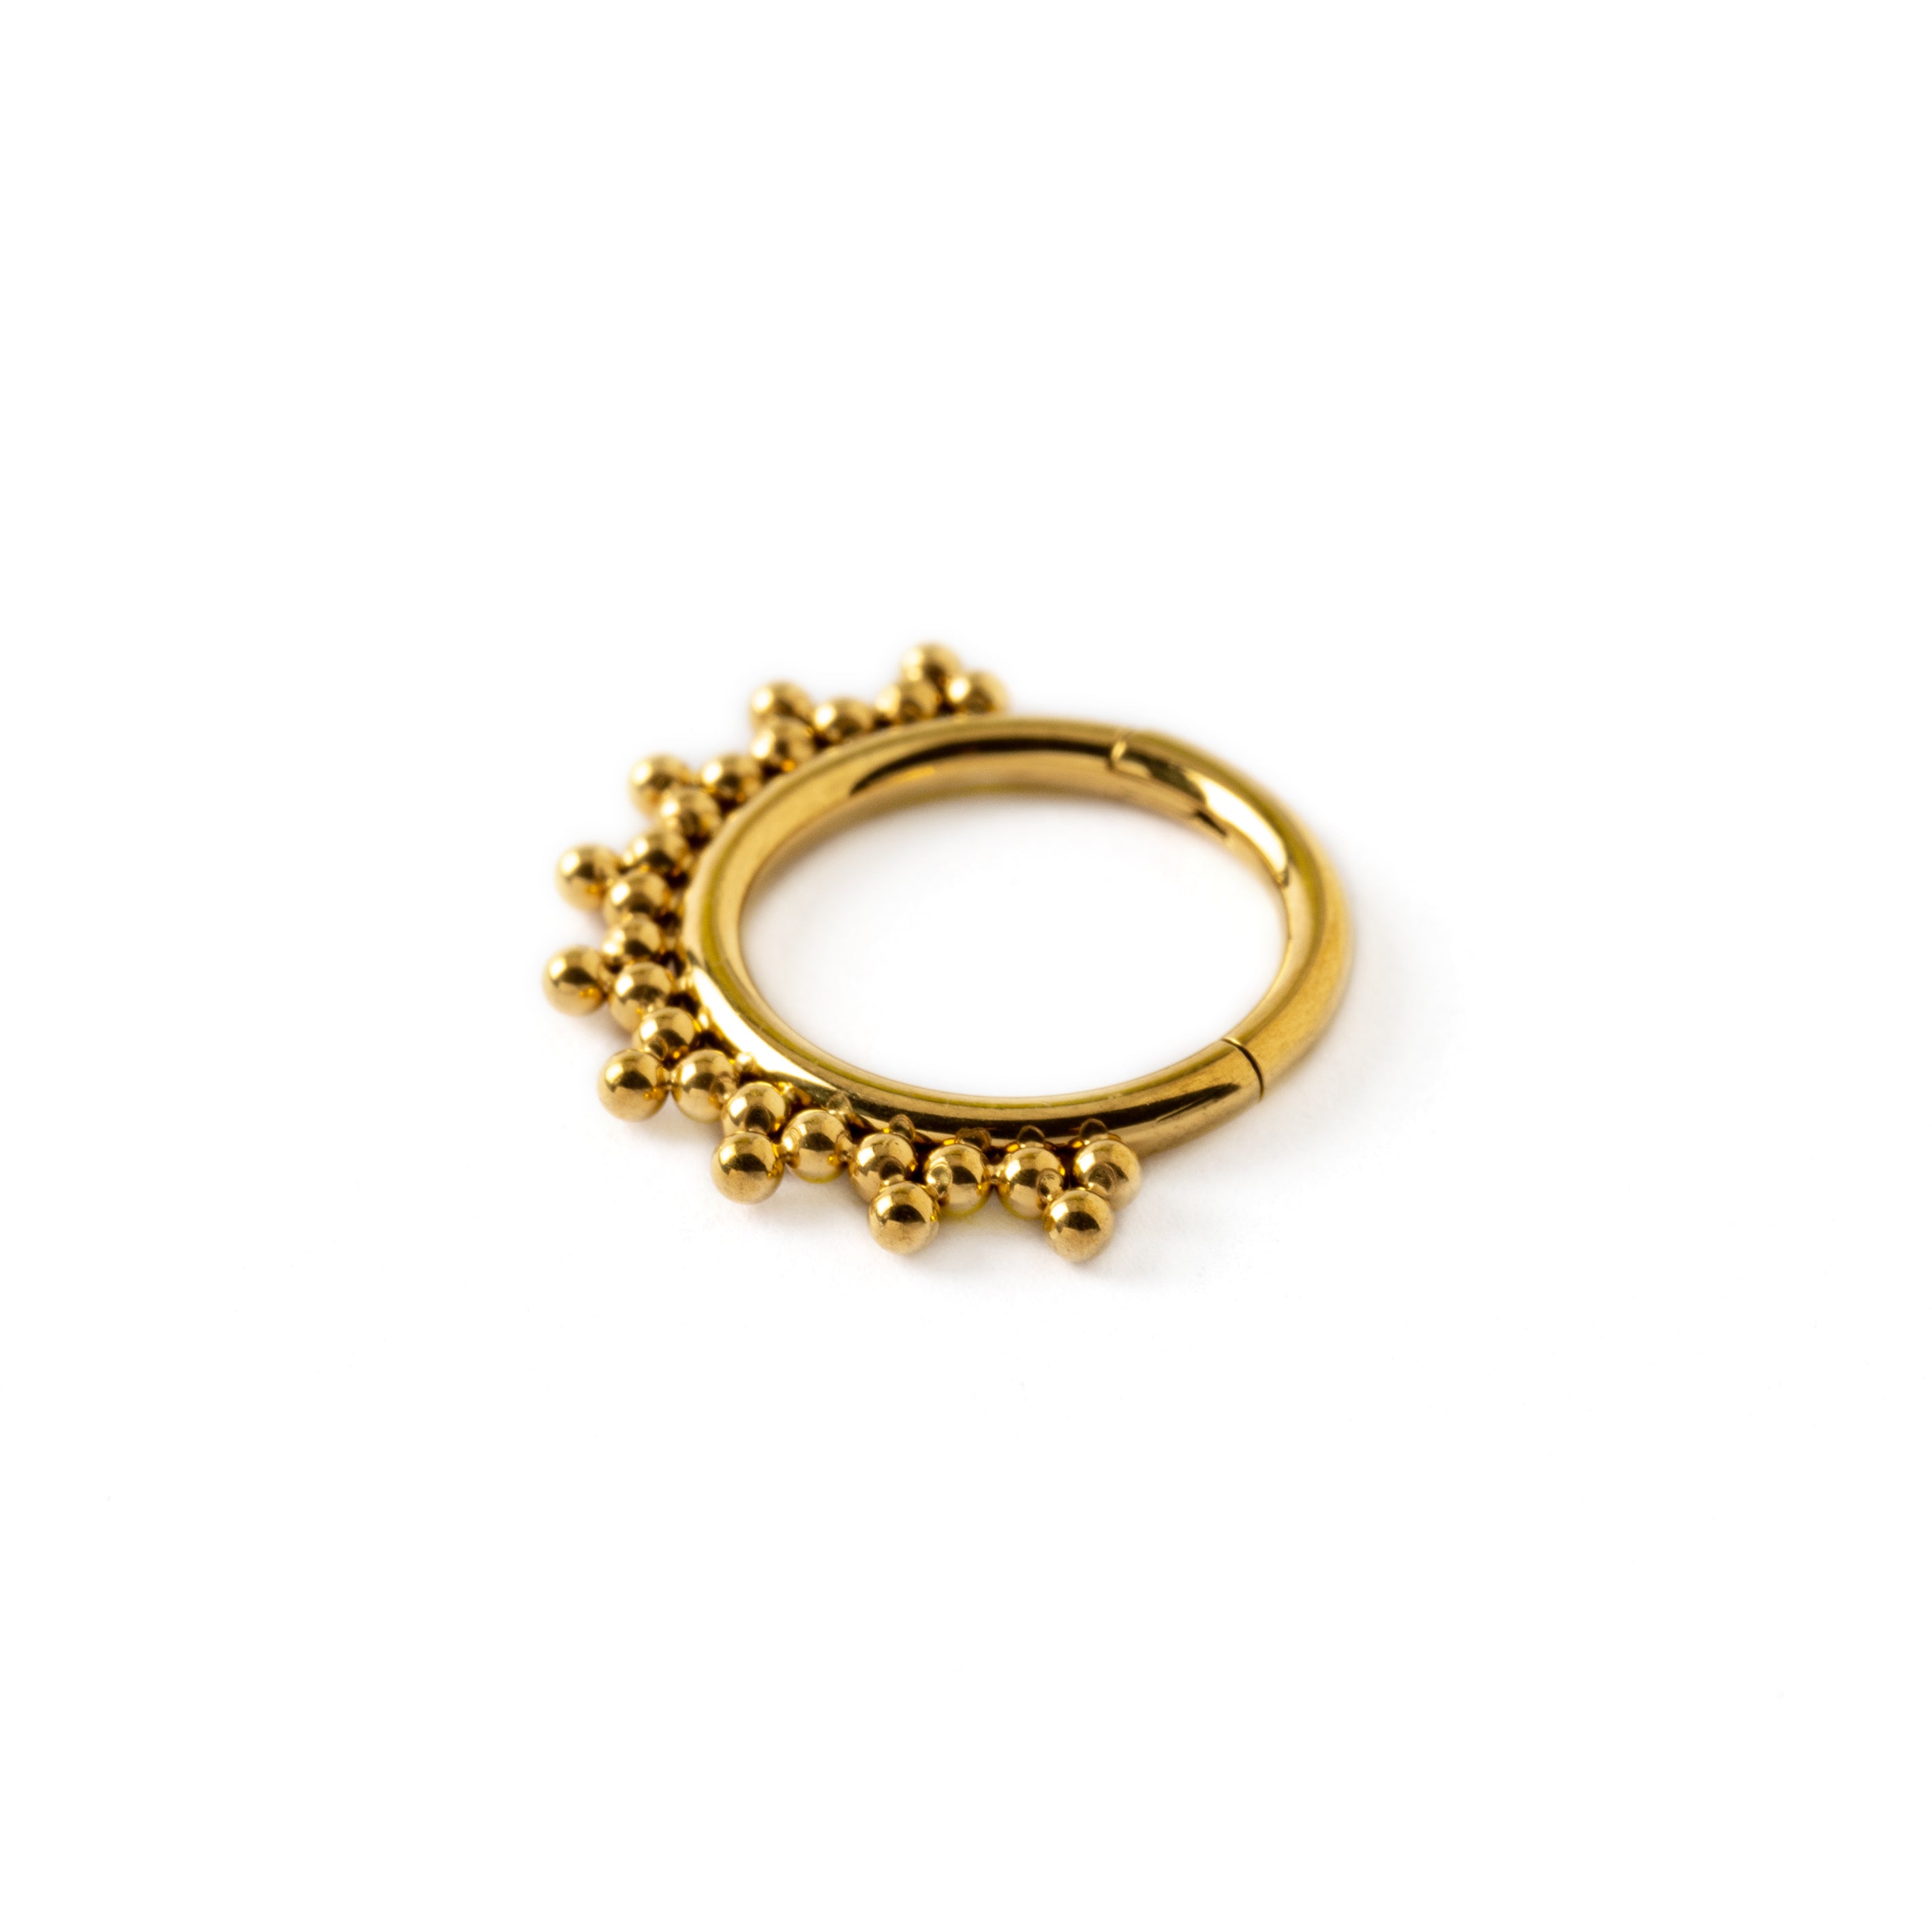 Sarika gold surgical steel septum clicker side view